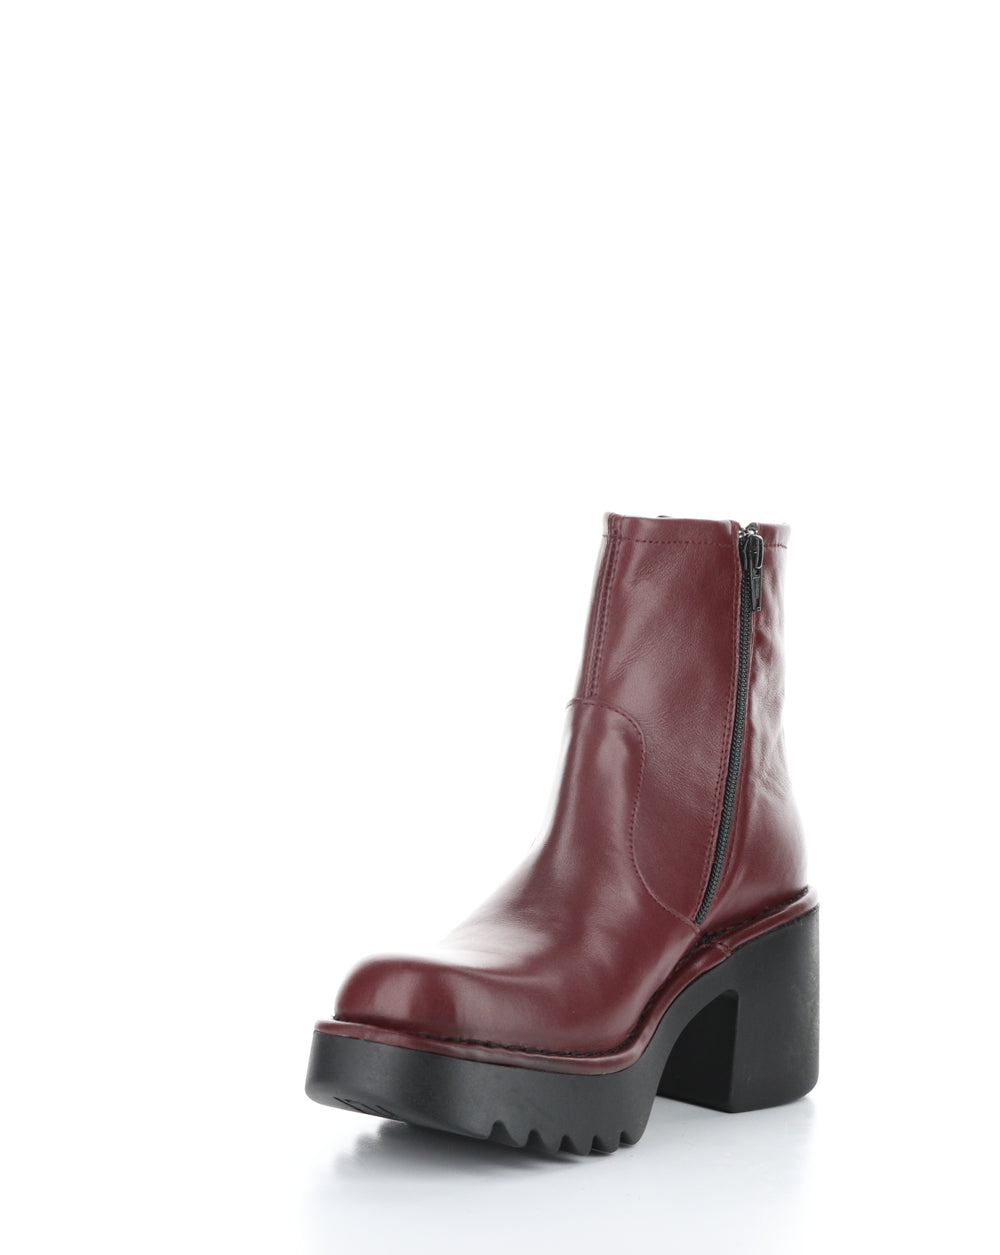 MOGE250FLY 003 WINE Round Toe Boots